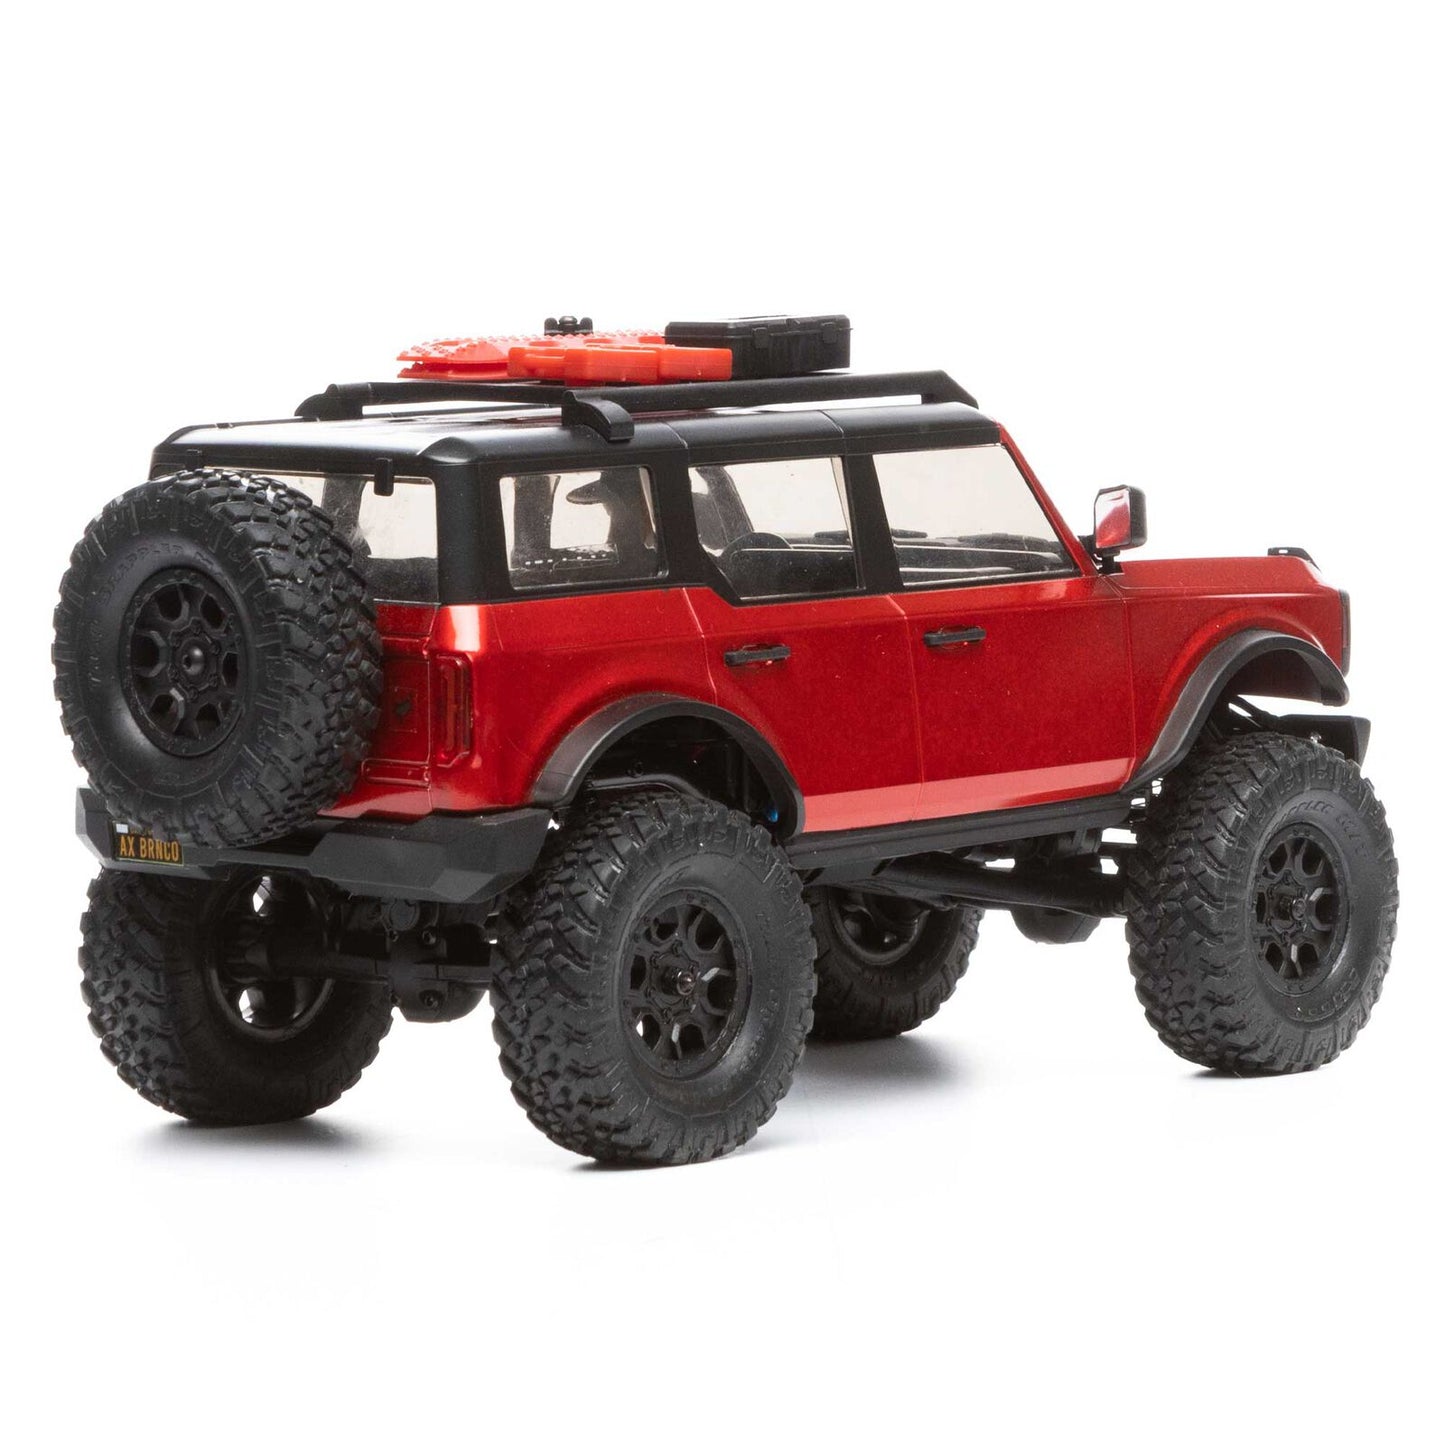 SCX 24 Bronco Red 1/24th Scale Crawler Package